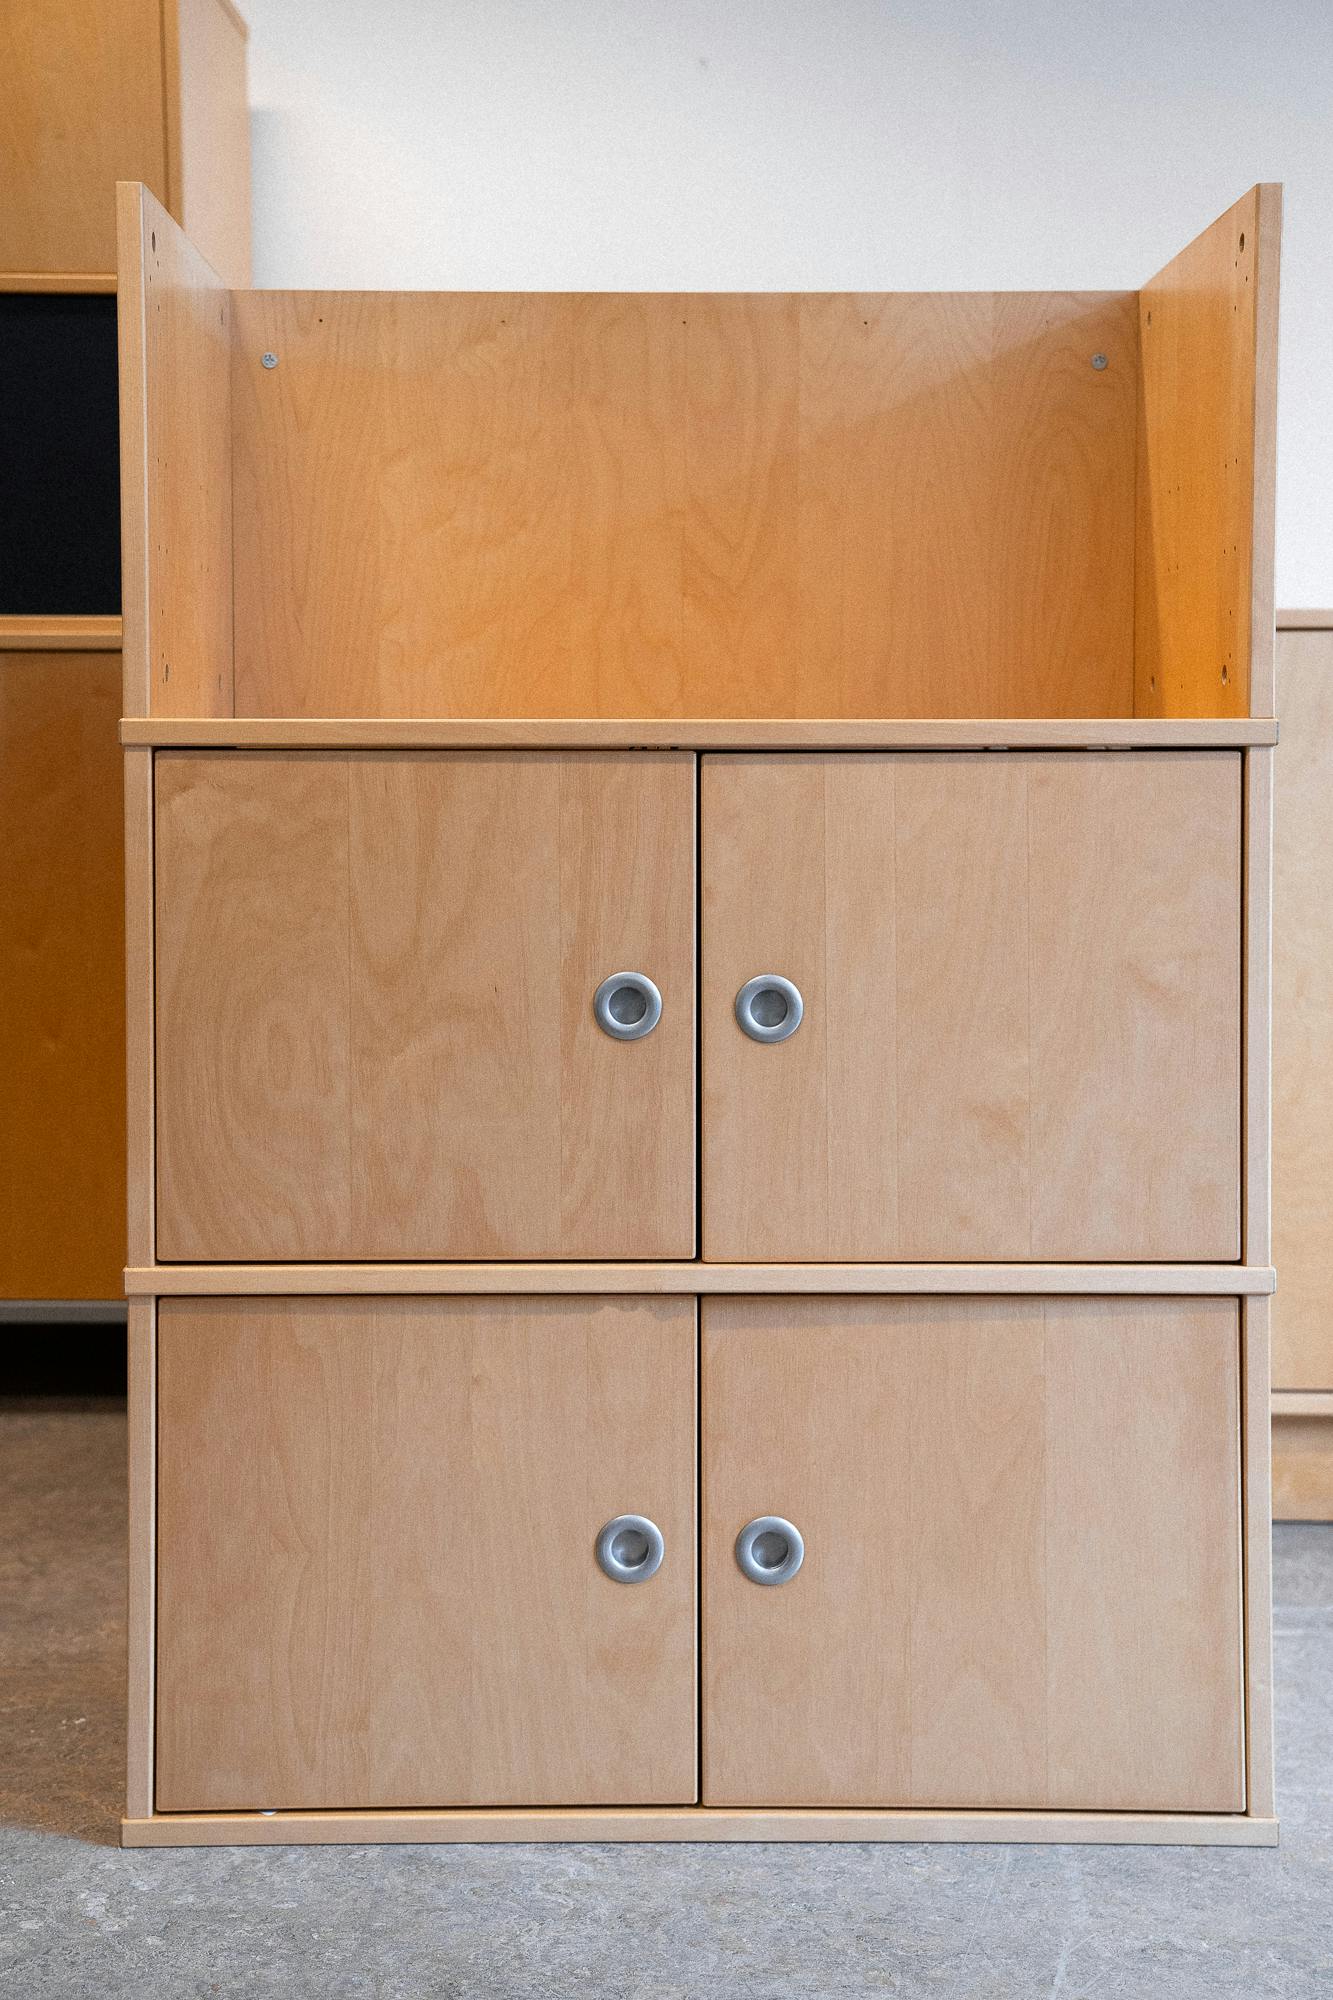 ikea wooden storage cabinet with extension - Second hand quality "Storage" - Relieve Furniture